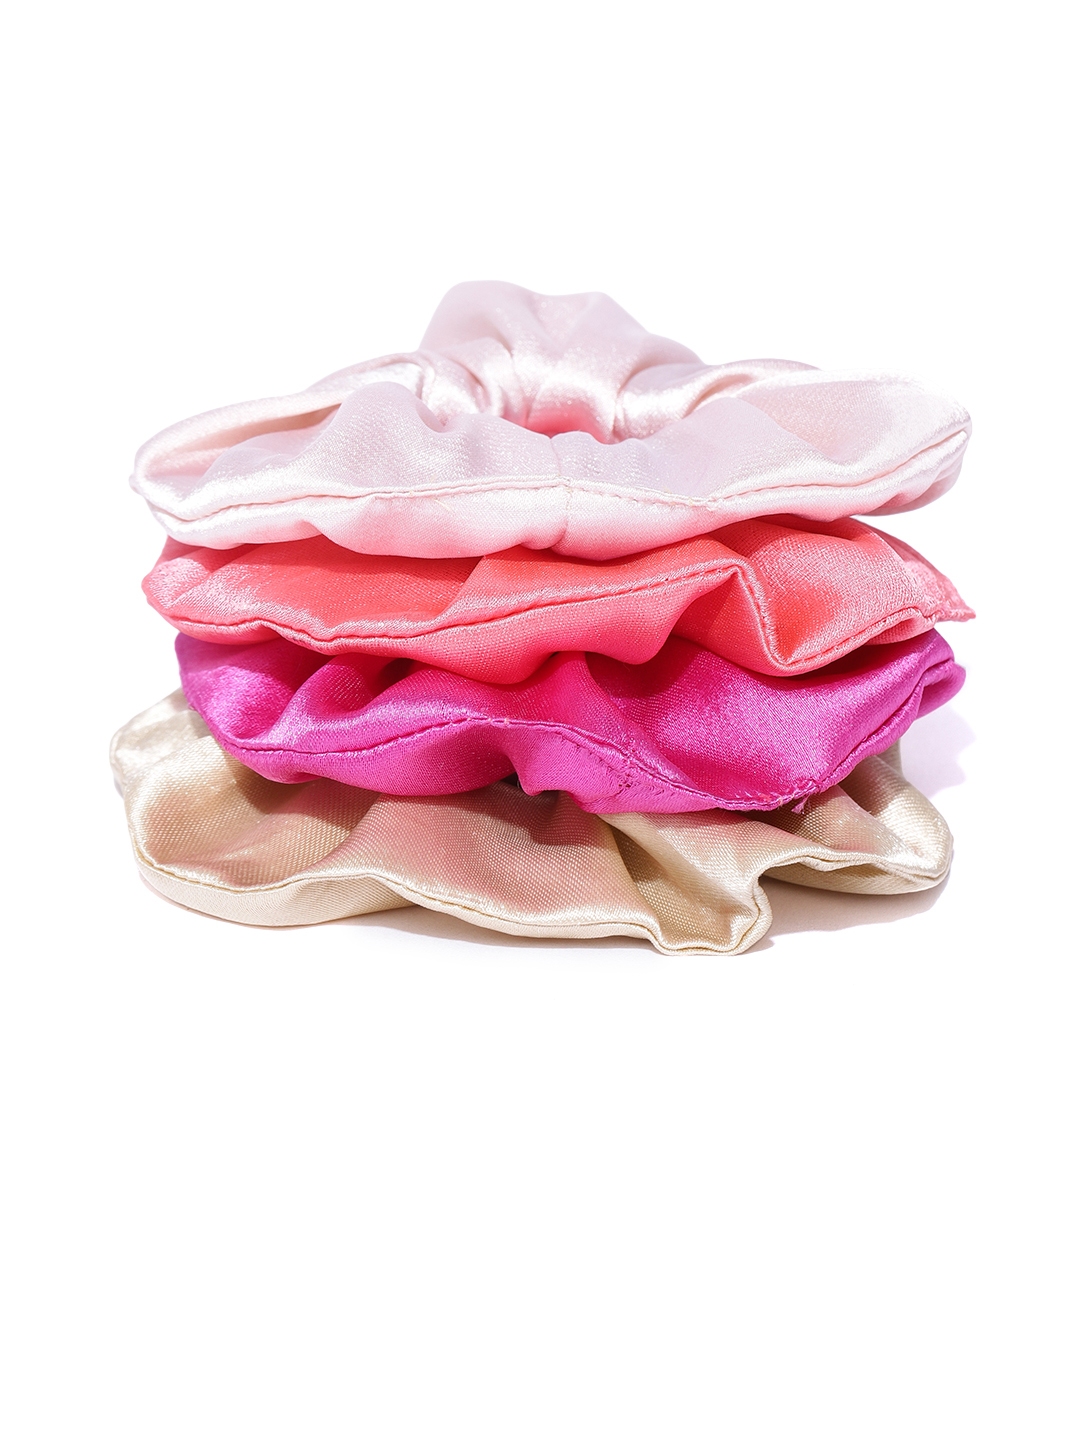 WHISTLE9 soft scrunchie Best hair scrunchies Satin Scrunchies Set of 6  Multicolor fancy scrunchies Pure Satin Scrunchies Hair Tie Elastic Large  Hair Bands Rubber Band Price in India  Buy WHISTLE9 soft